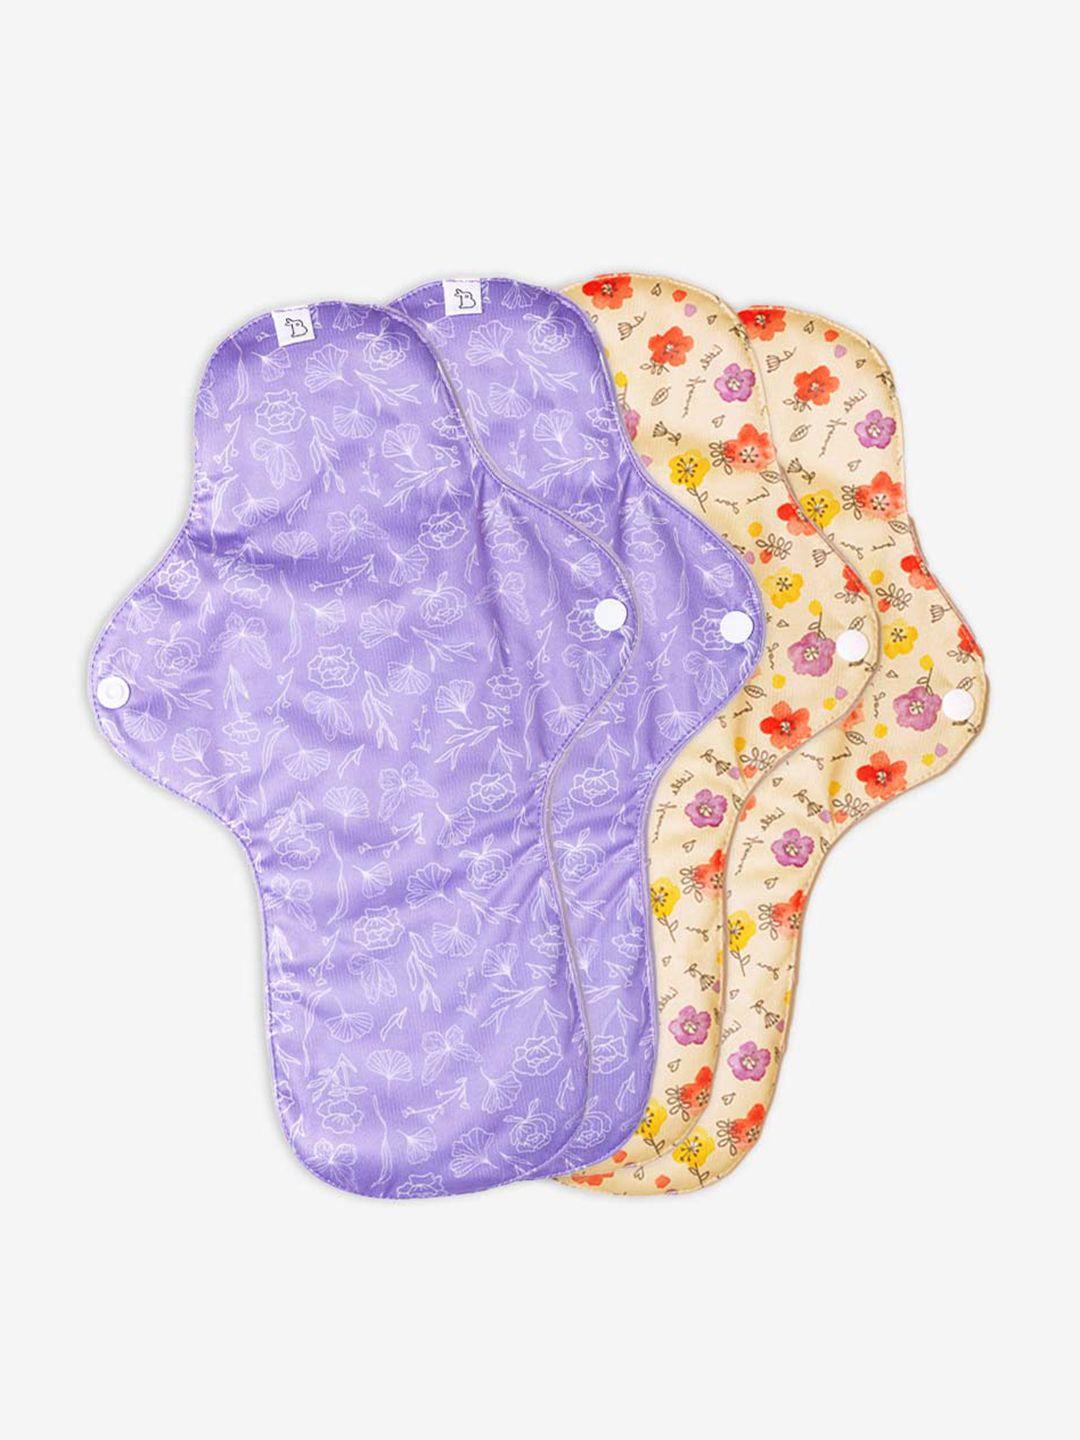 superbottoms set of 4 reusable panty liners